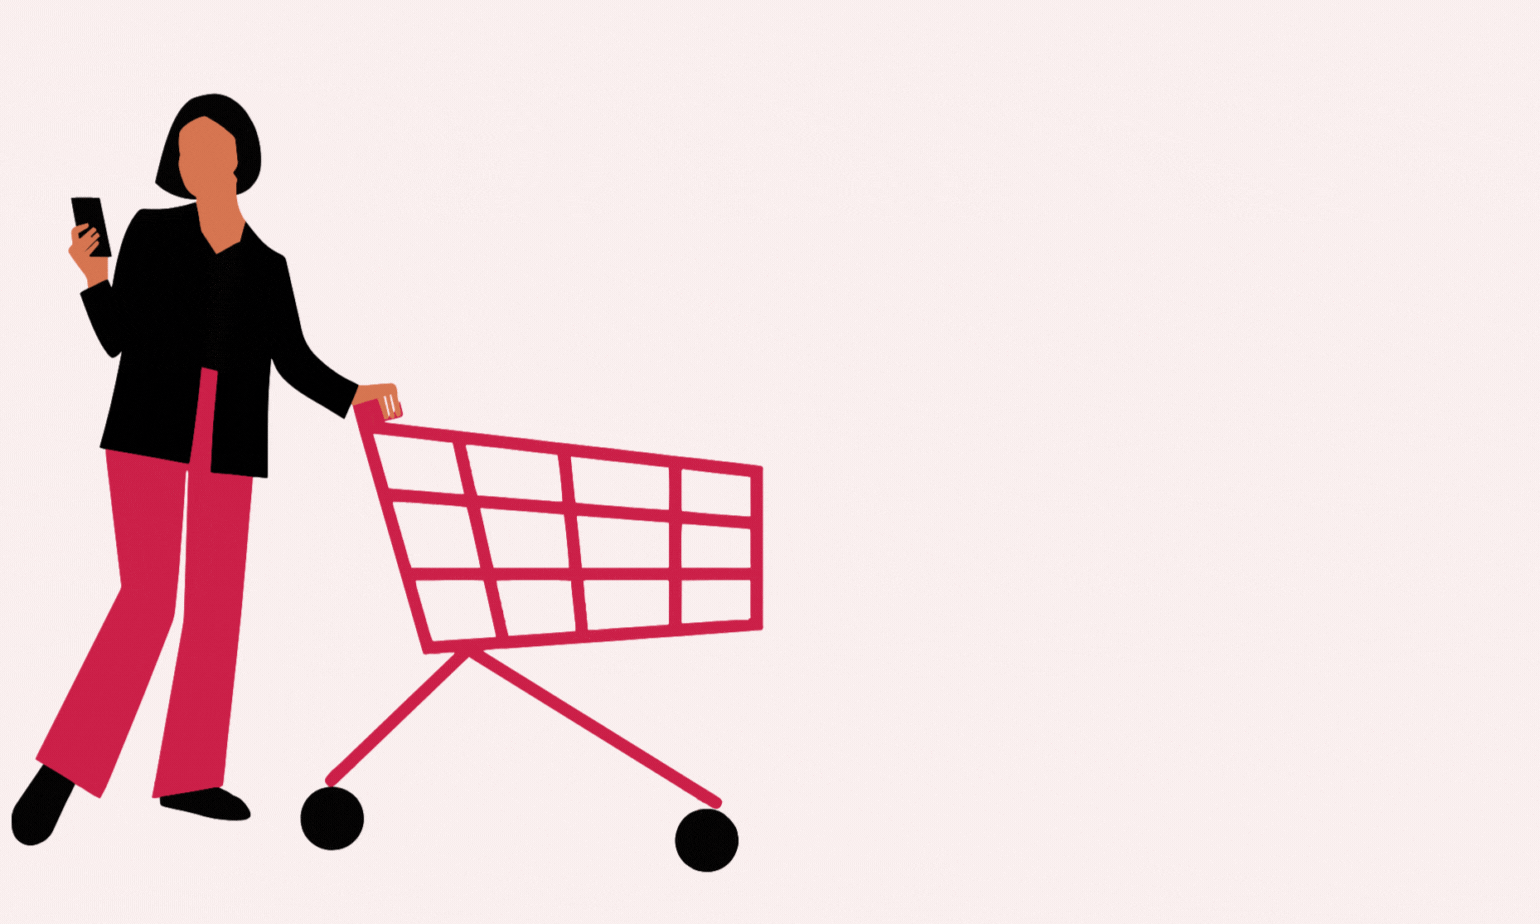 Animation of a woman walking with a shopping cart in one hand and her smartphone in the other